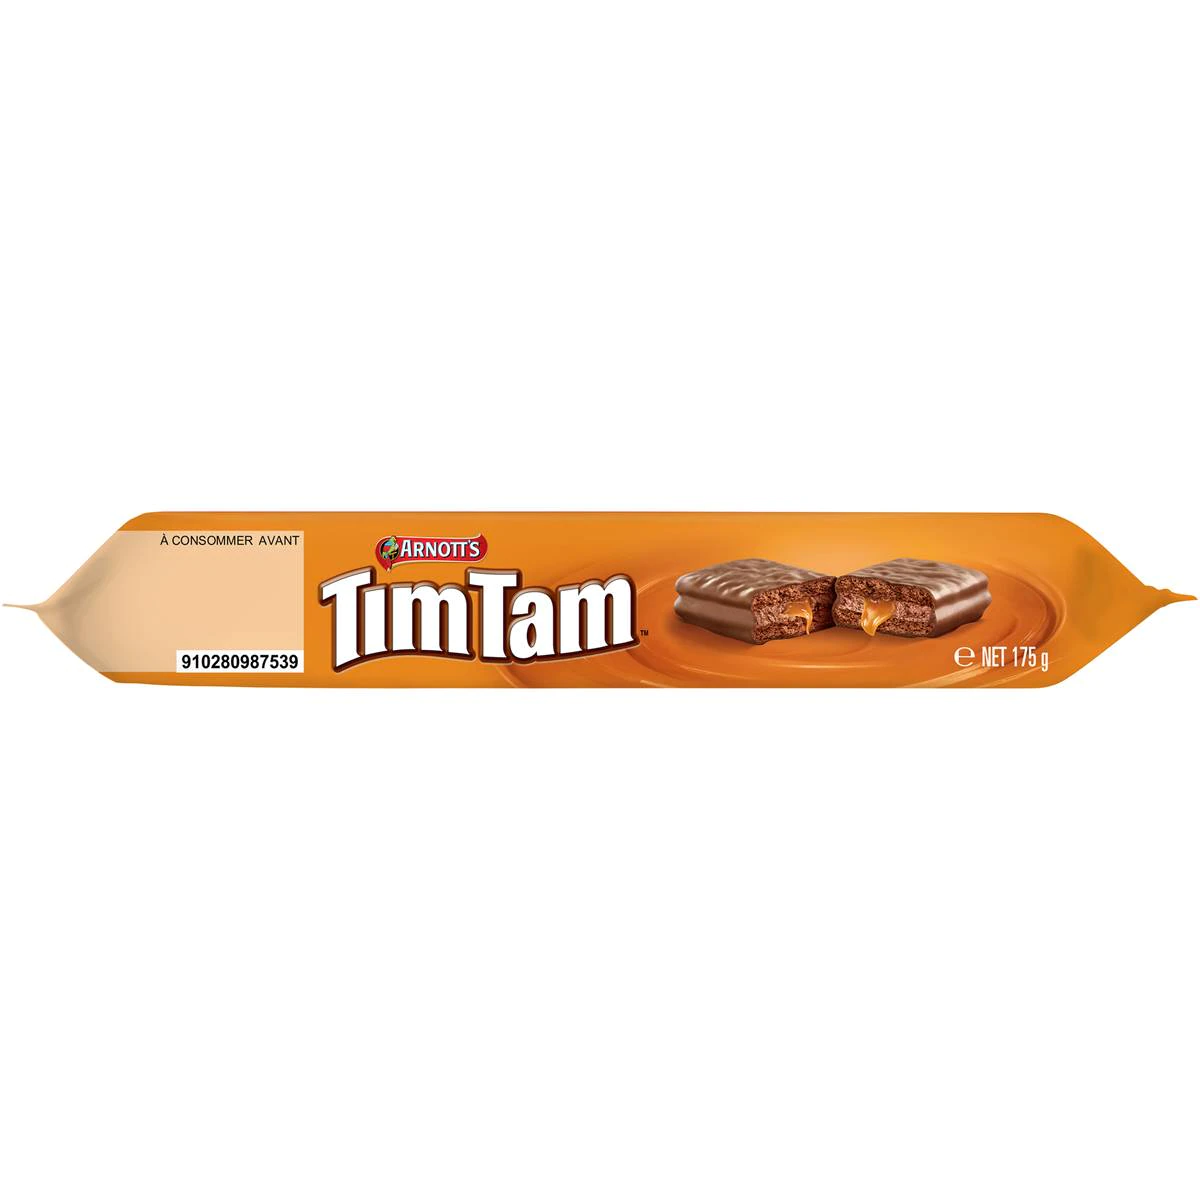 Arnott's Tim Tam Chocolate Biscuits, 175 Grams/6.2 Ounces, Chewy Caramel - image 4 of 6